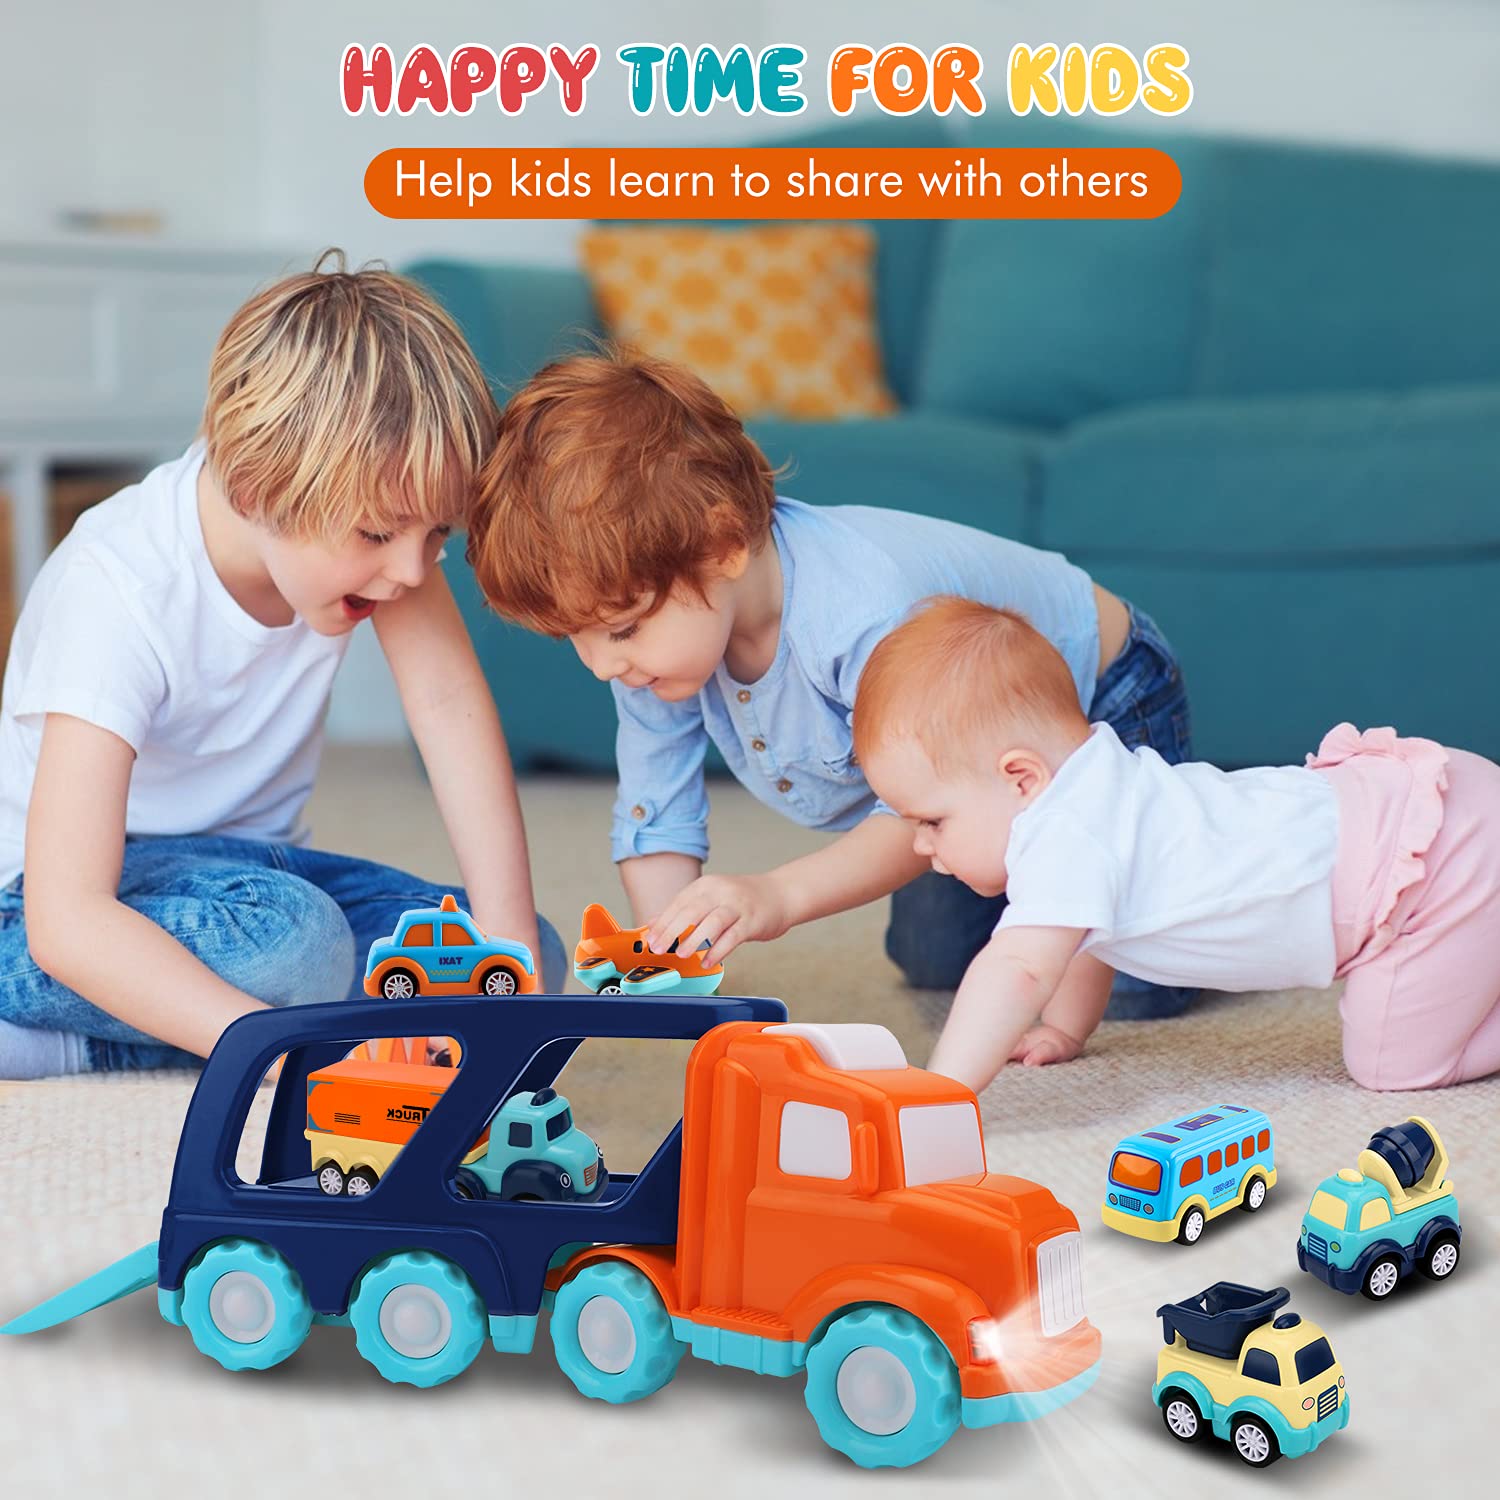 Toddler Toys Car for Boys: Kids Toys for 1 2 3 4 5 Year Old Boys Girls | Boy Toys 7 in 1 Carrier Vehicle Toy Trucks Baby Toys 12-18 Months Party Christmas Birthday Gifts for Boys Toddler Toys Age 2-4